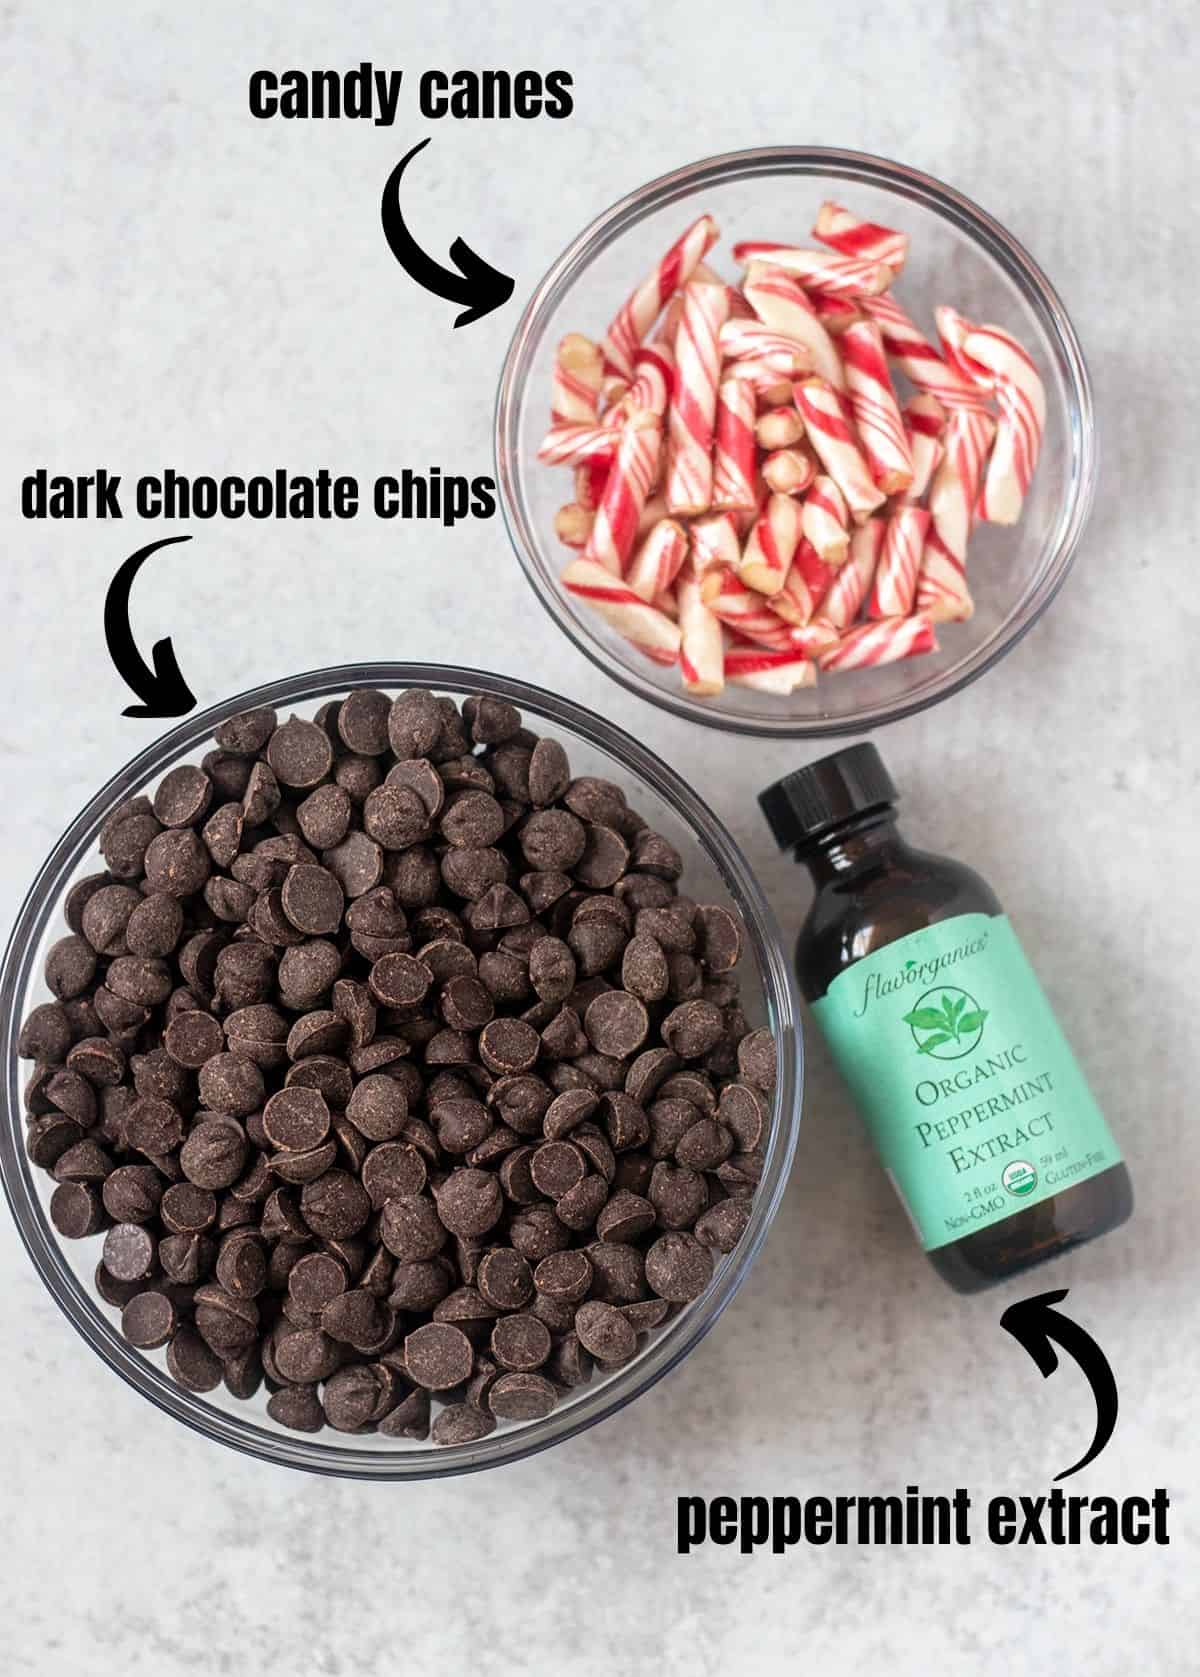 dark chocolate chips, candy canes, and peppermint extract